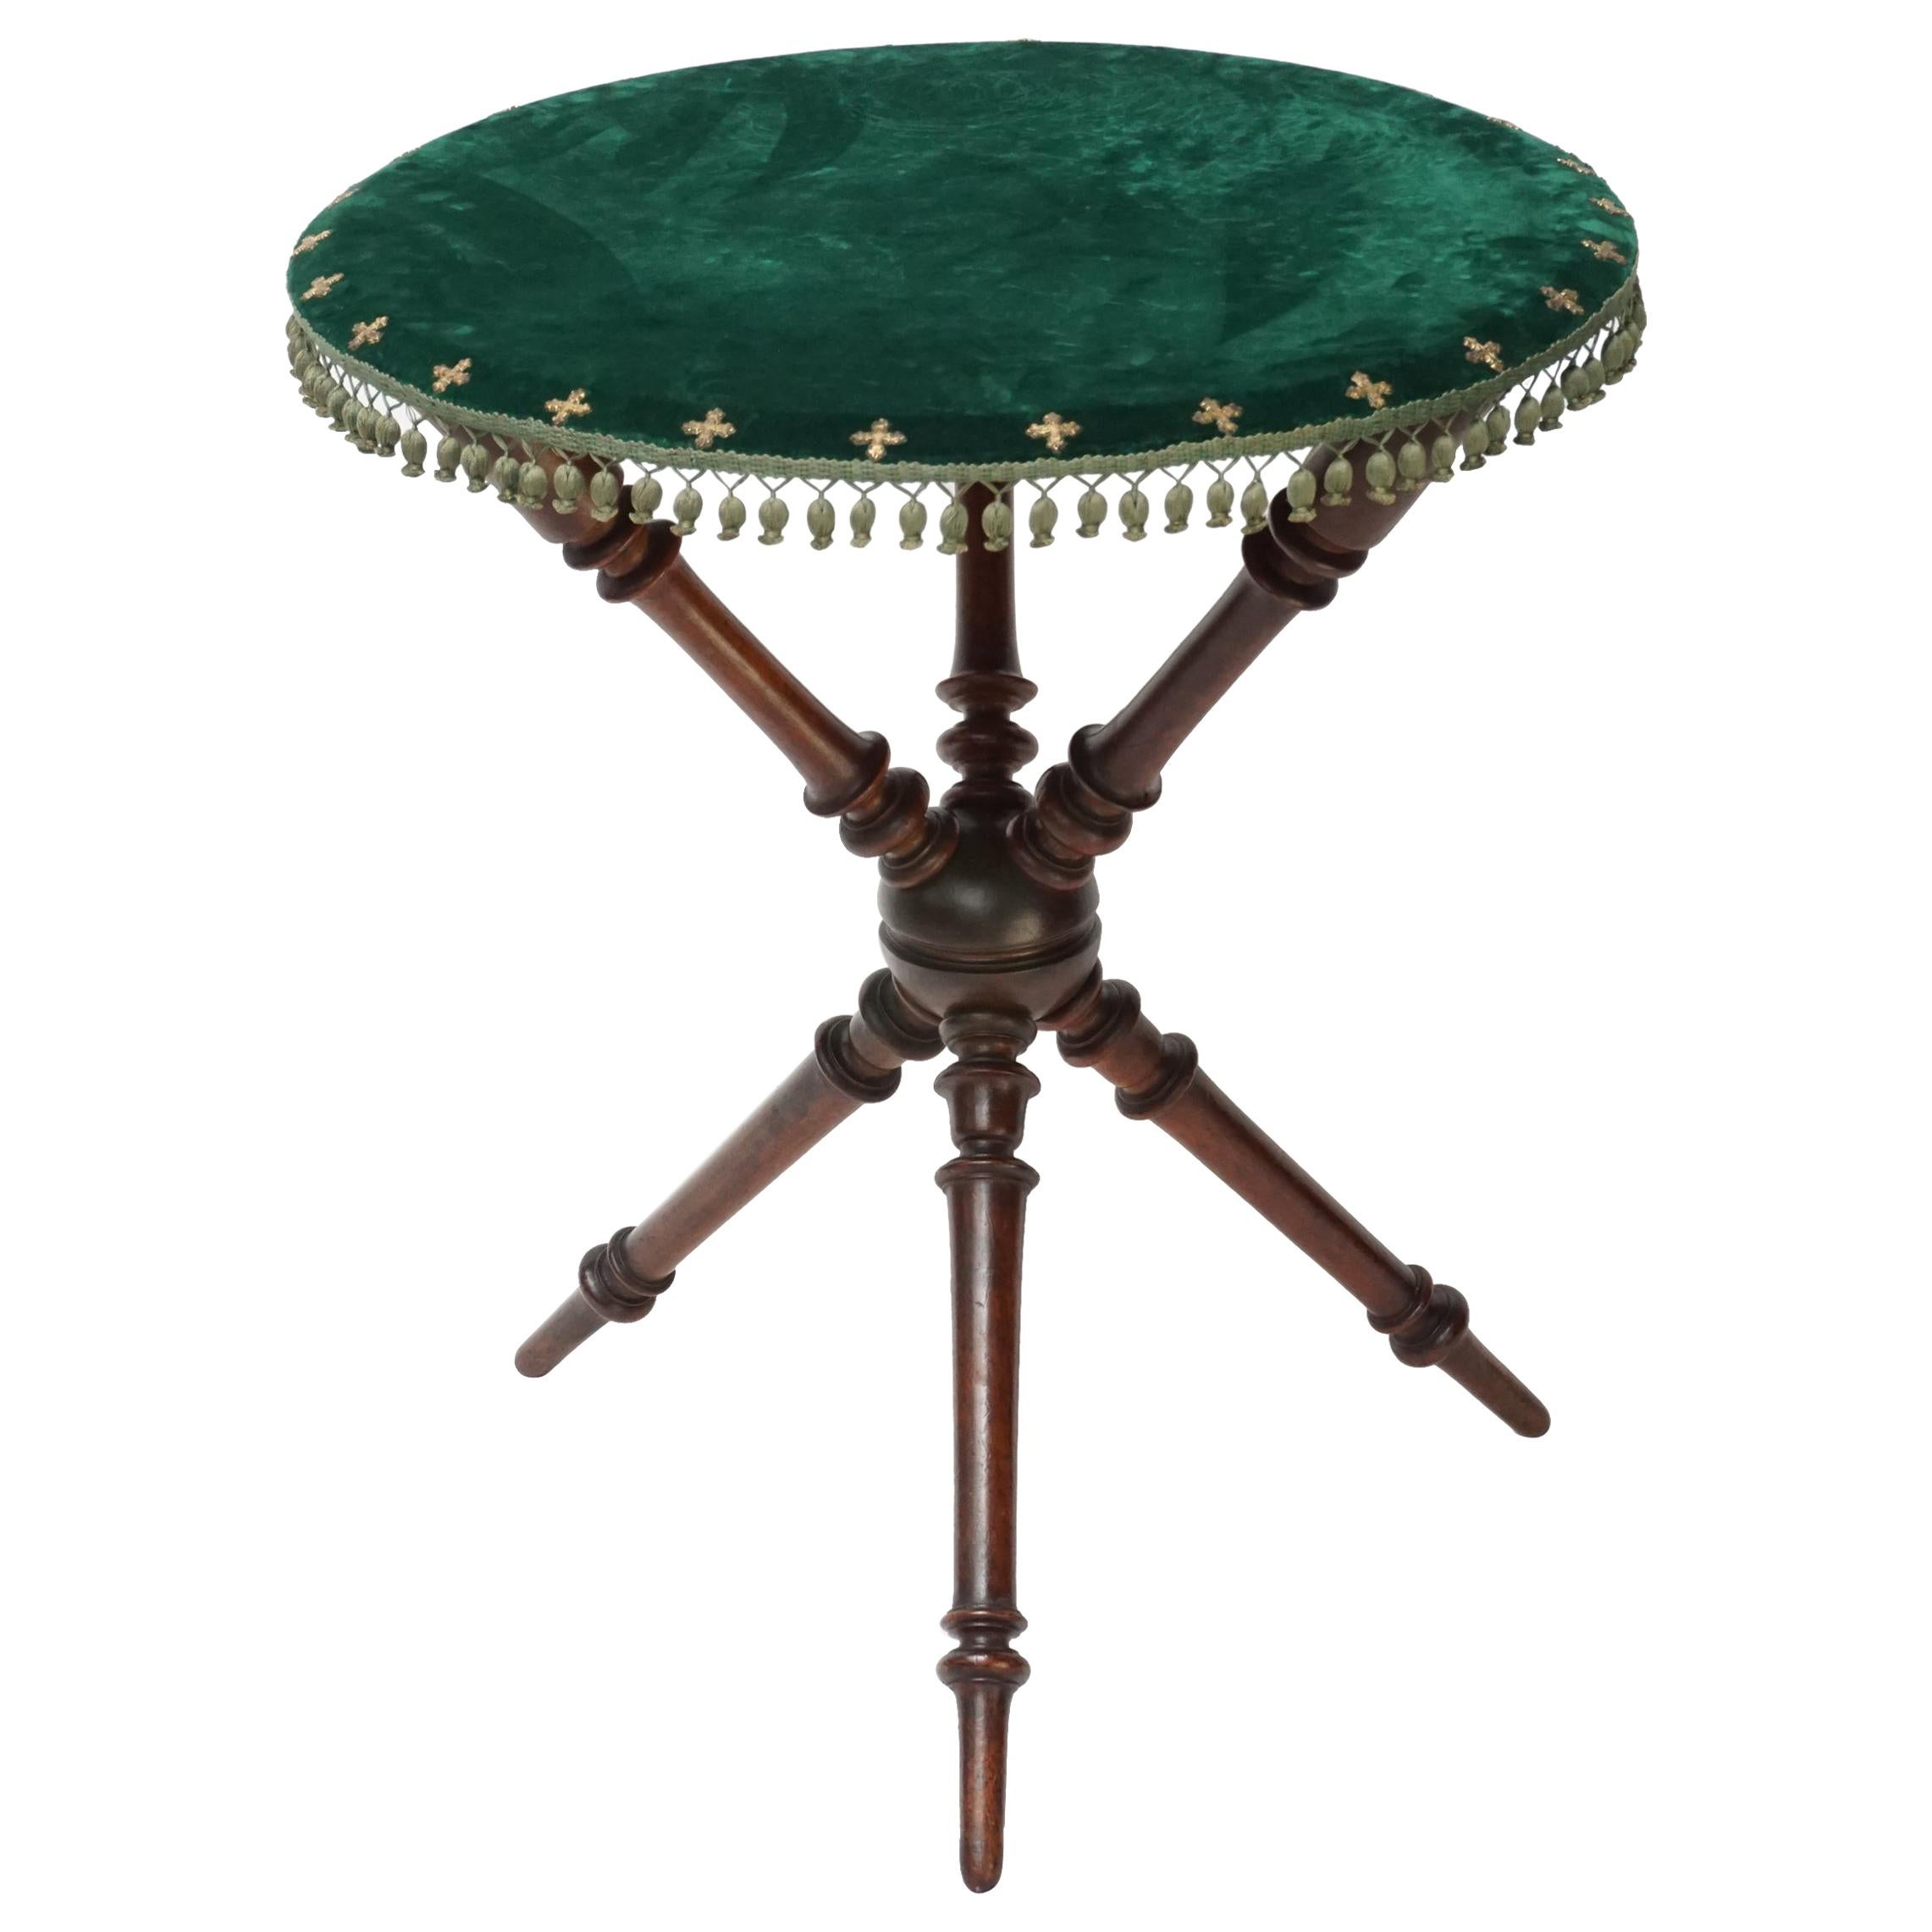 20th Century Occasional Mahogany Table with Green Velvet Top with Gilt Crosses